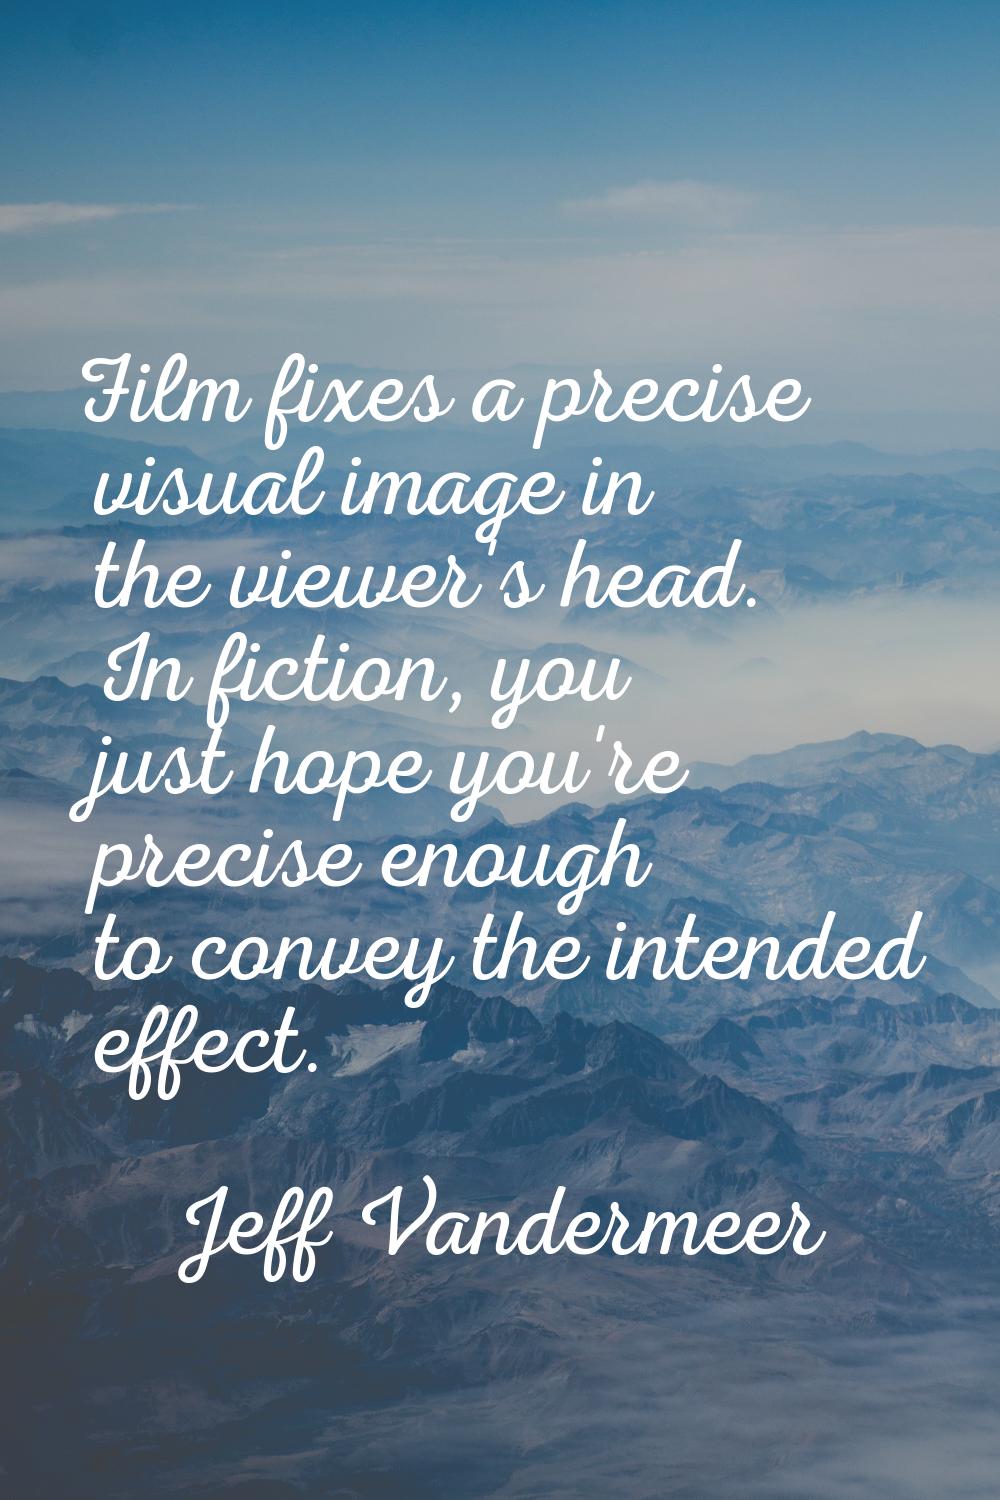 Film fixes a precise visual image in the viewer's head. In fiction, you just hope you're precise en